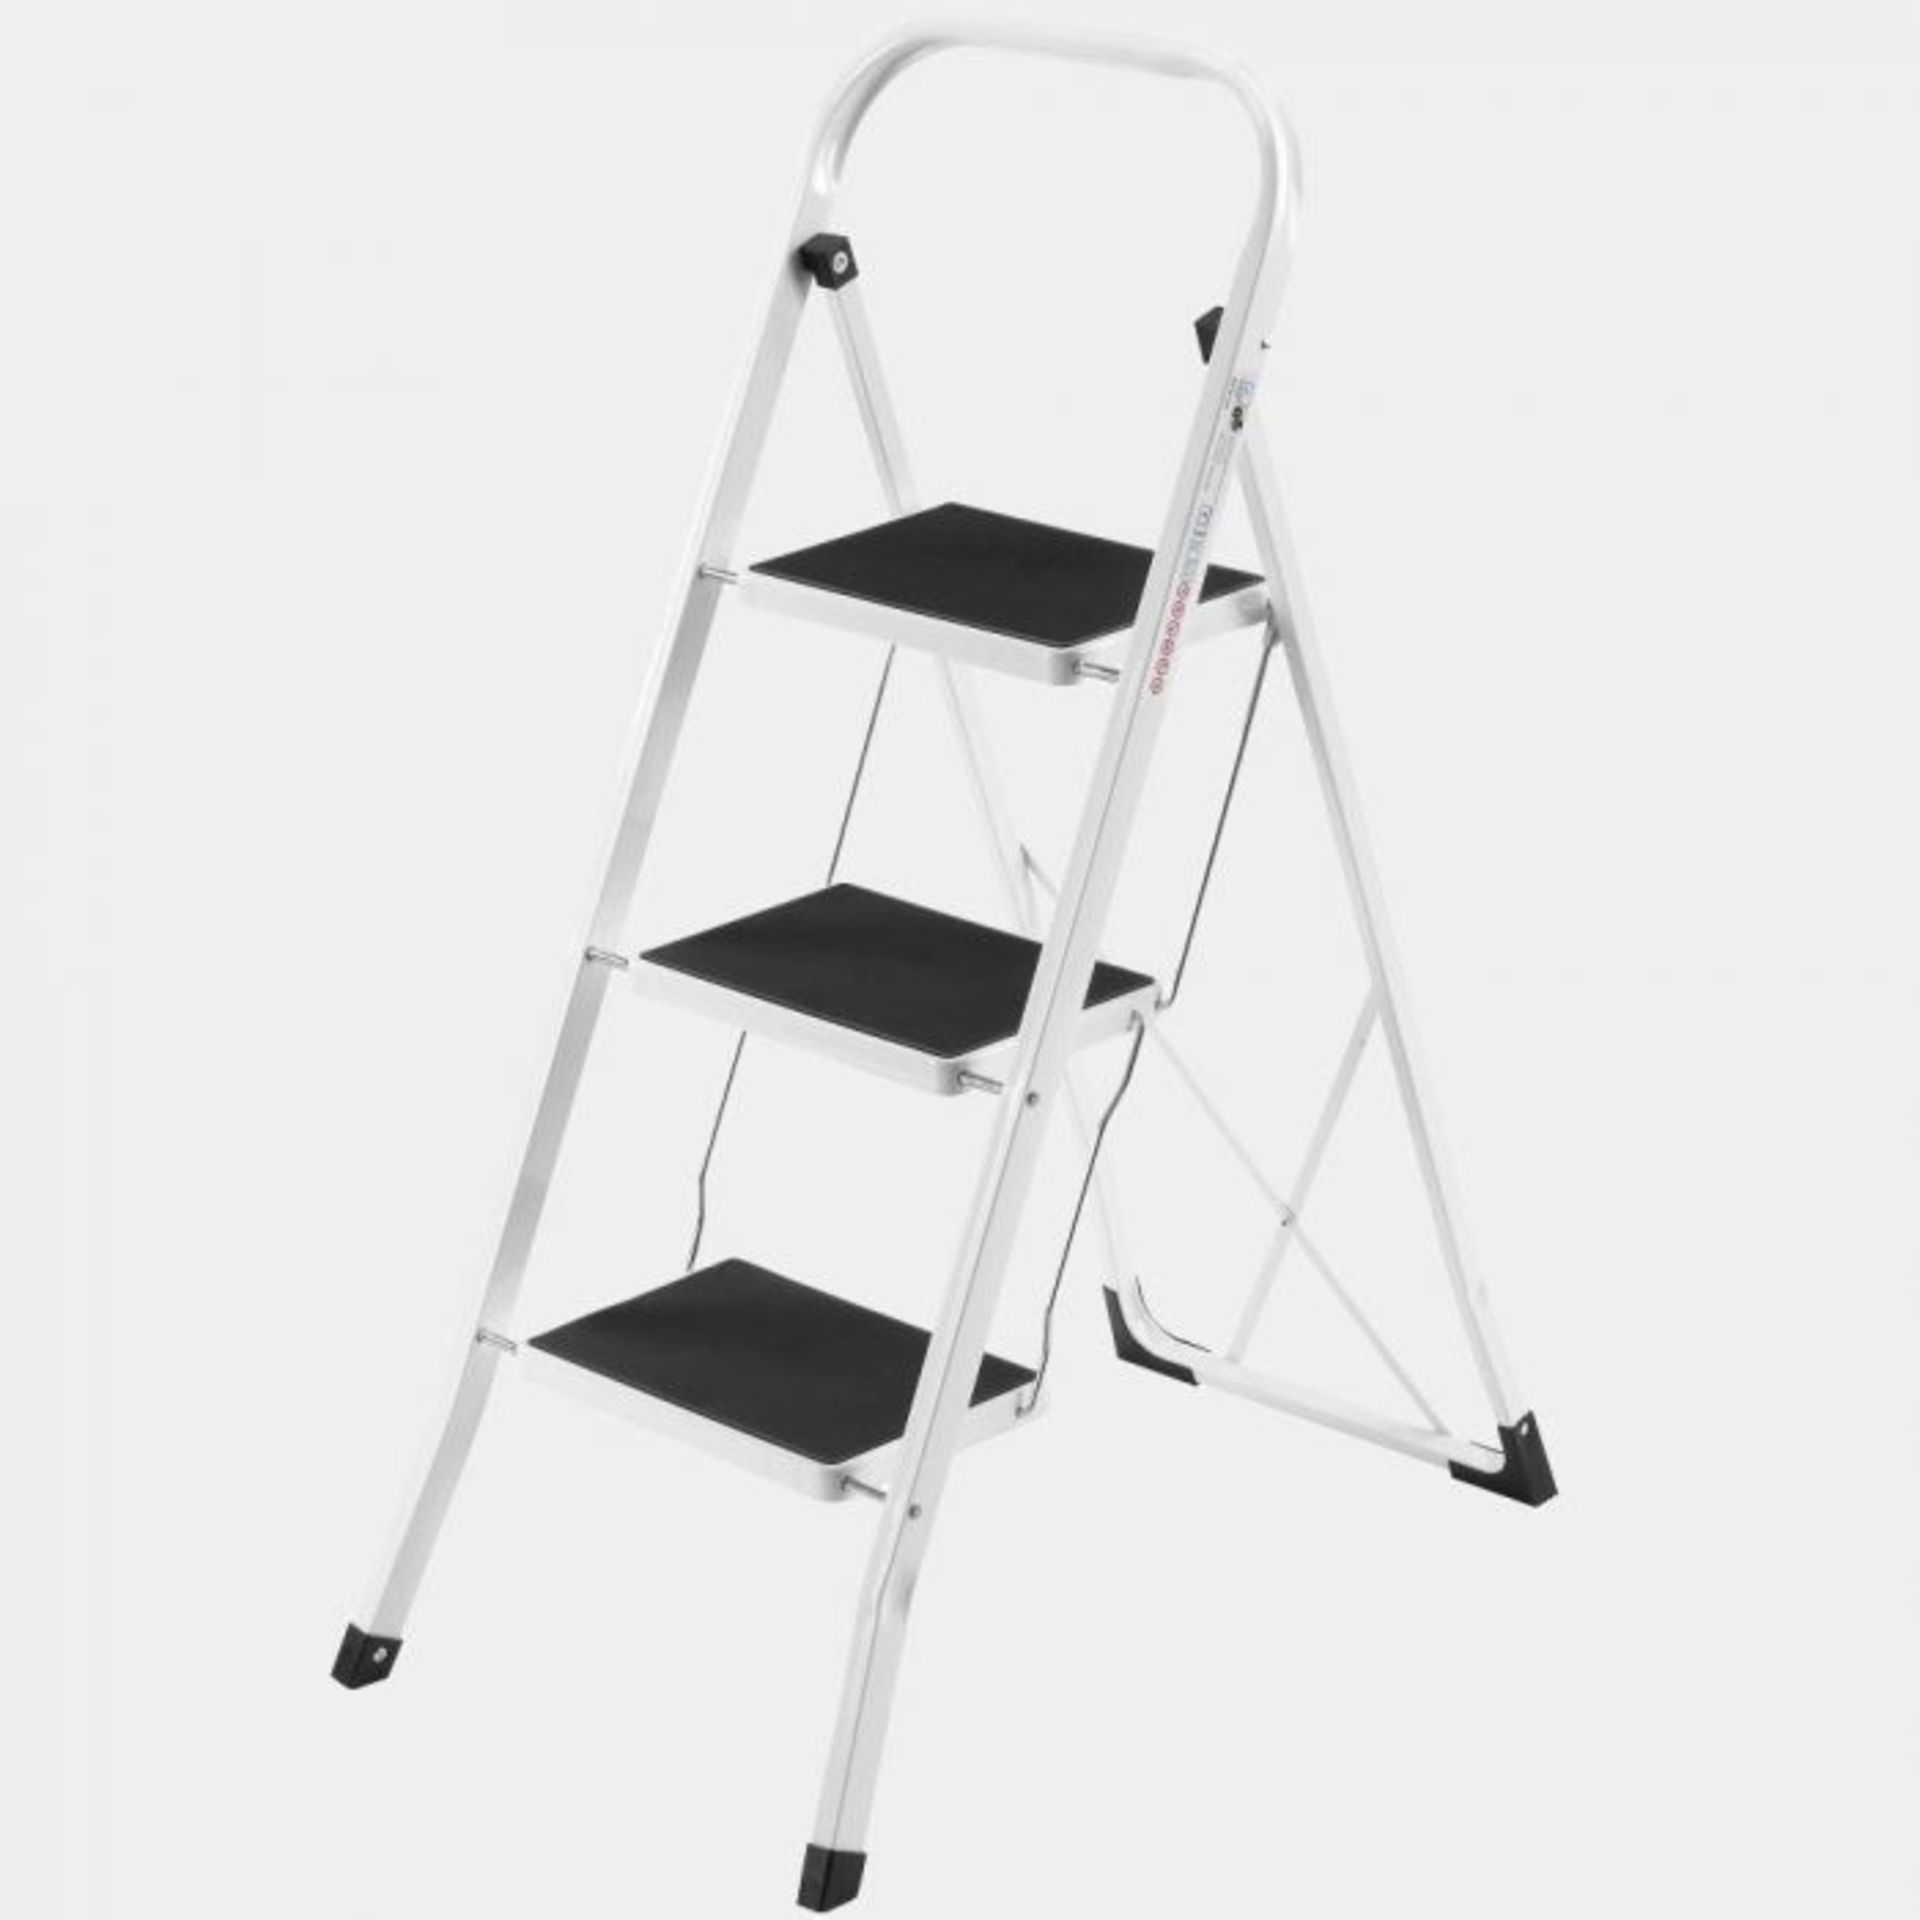 Heavy Duty 3 Step Ladder.Lightweight, portable and reliable, the luxury 3 Step Folding Step Ladder